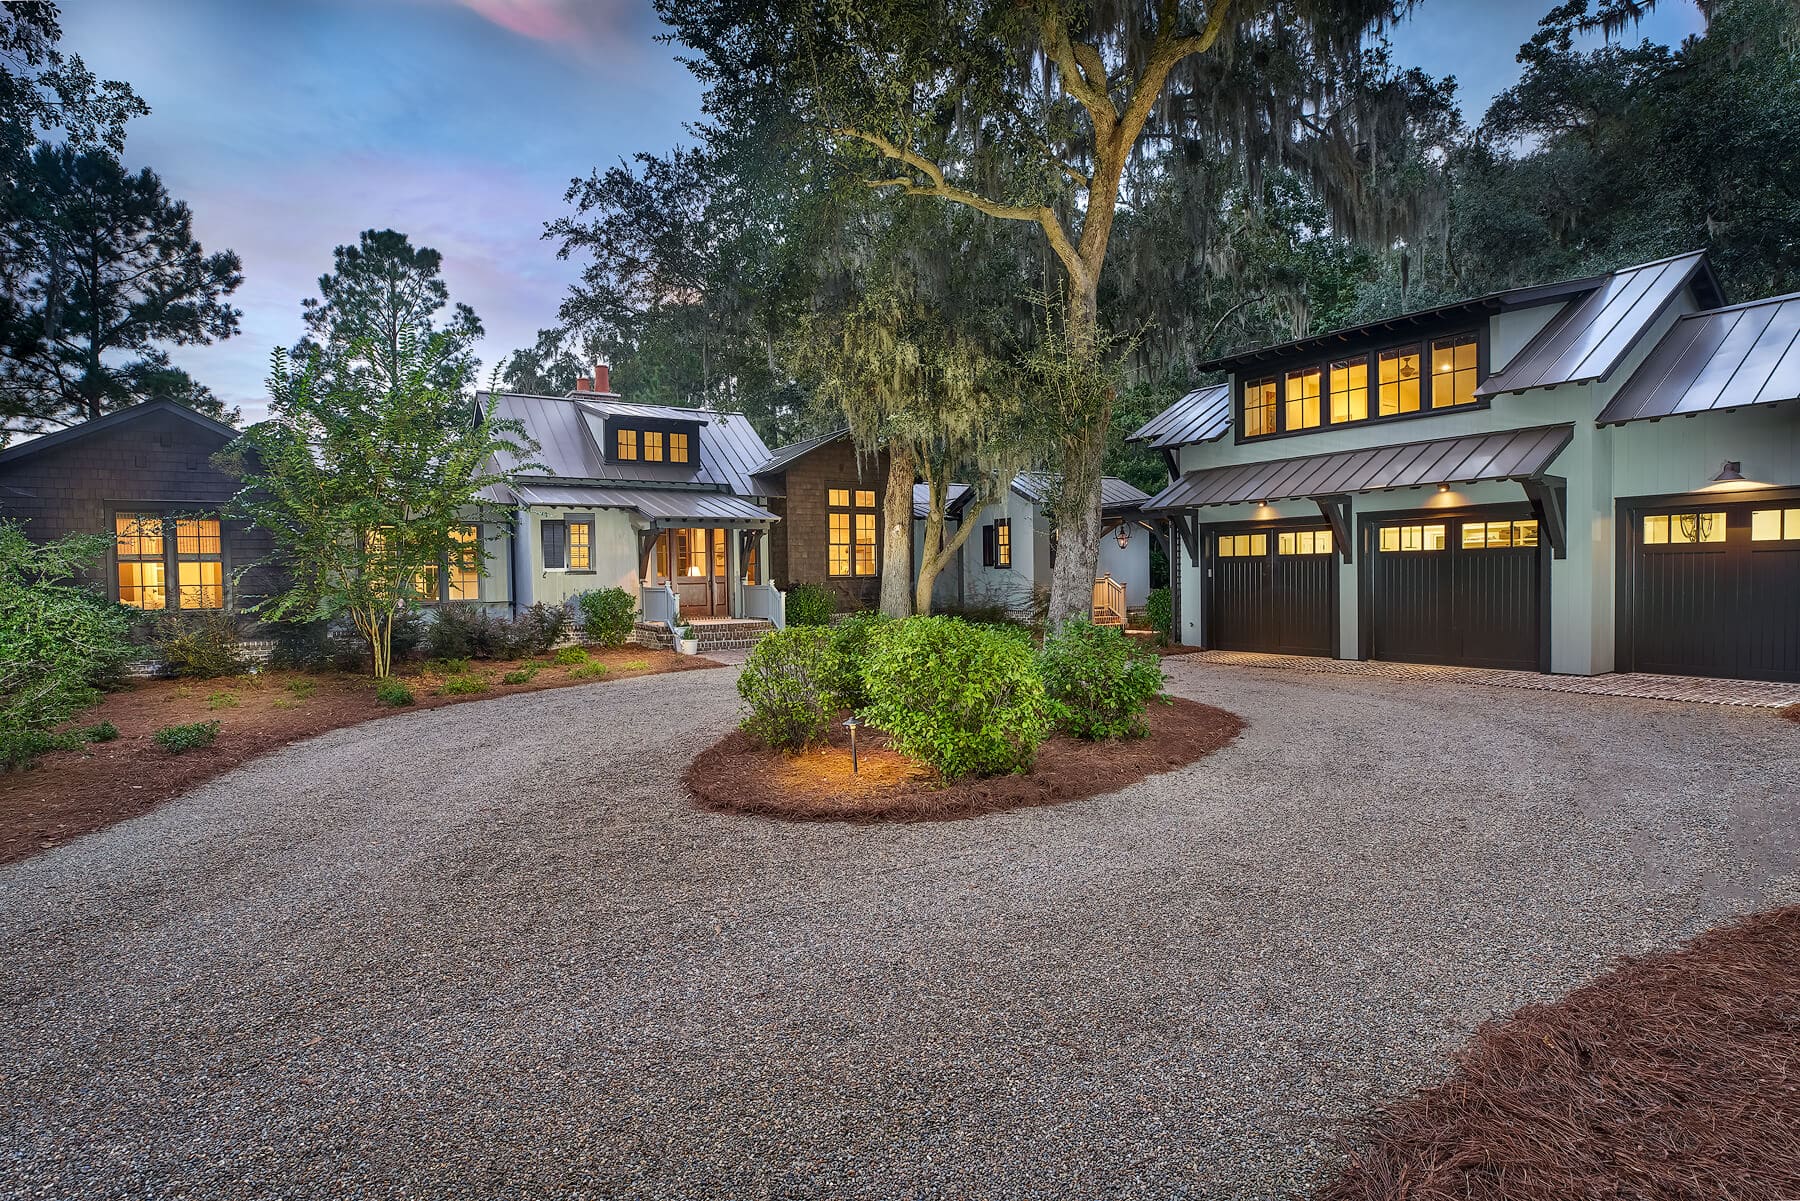 Country Living Home Palmetto Bluff